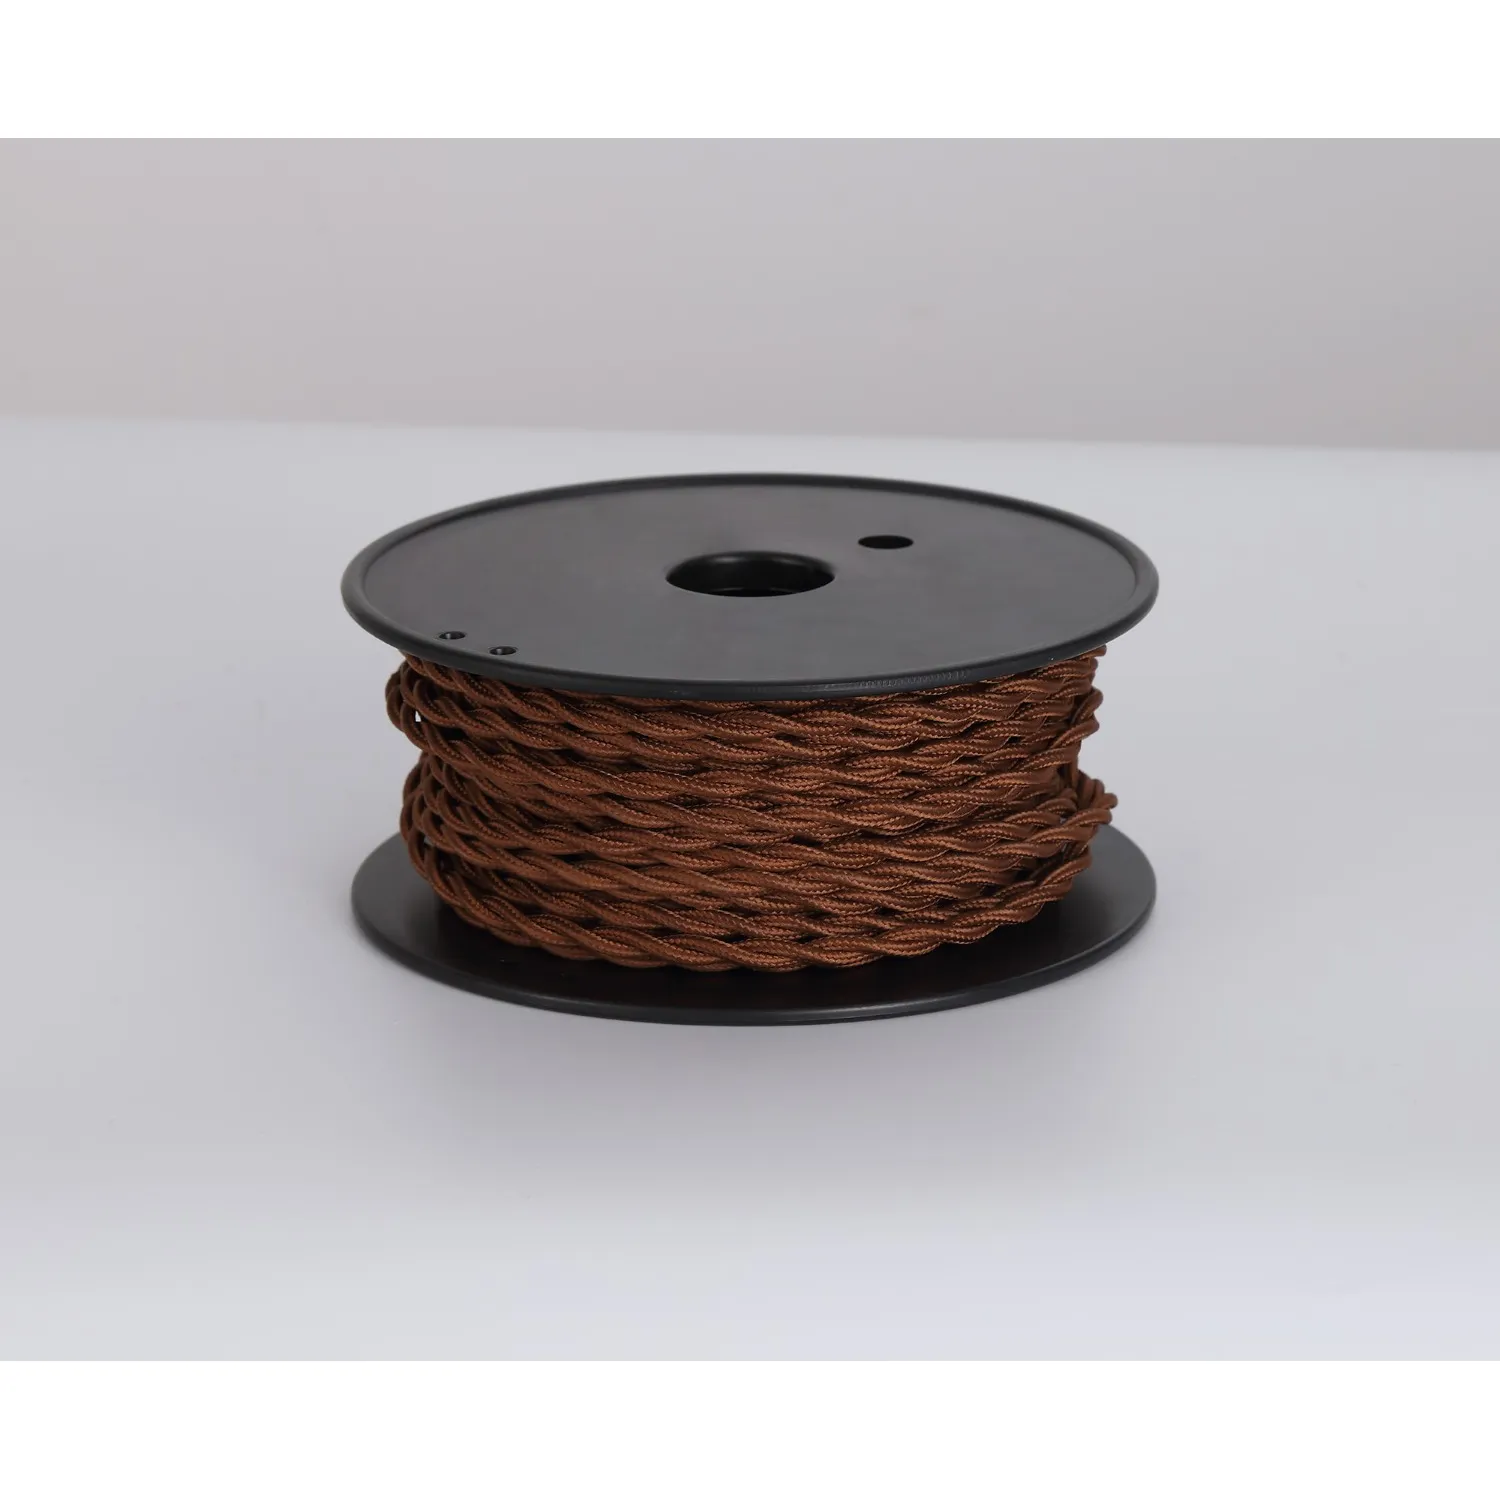 Knightsbridge 25m Roll Dark Brown Braided Twisted 2 Core 0.75mm Cable VDE Approved